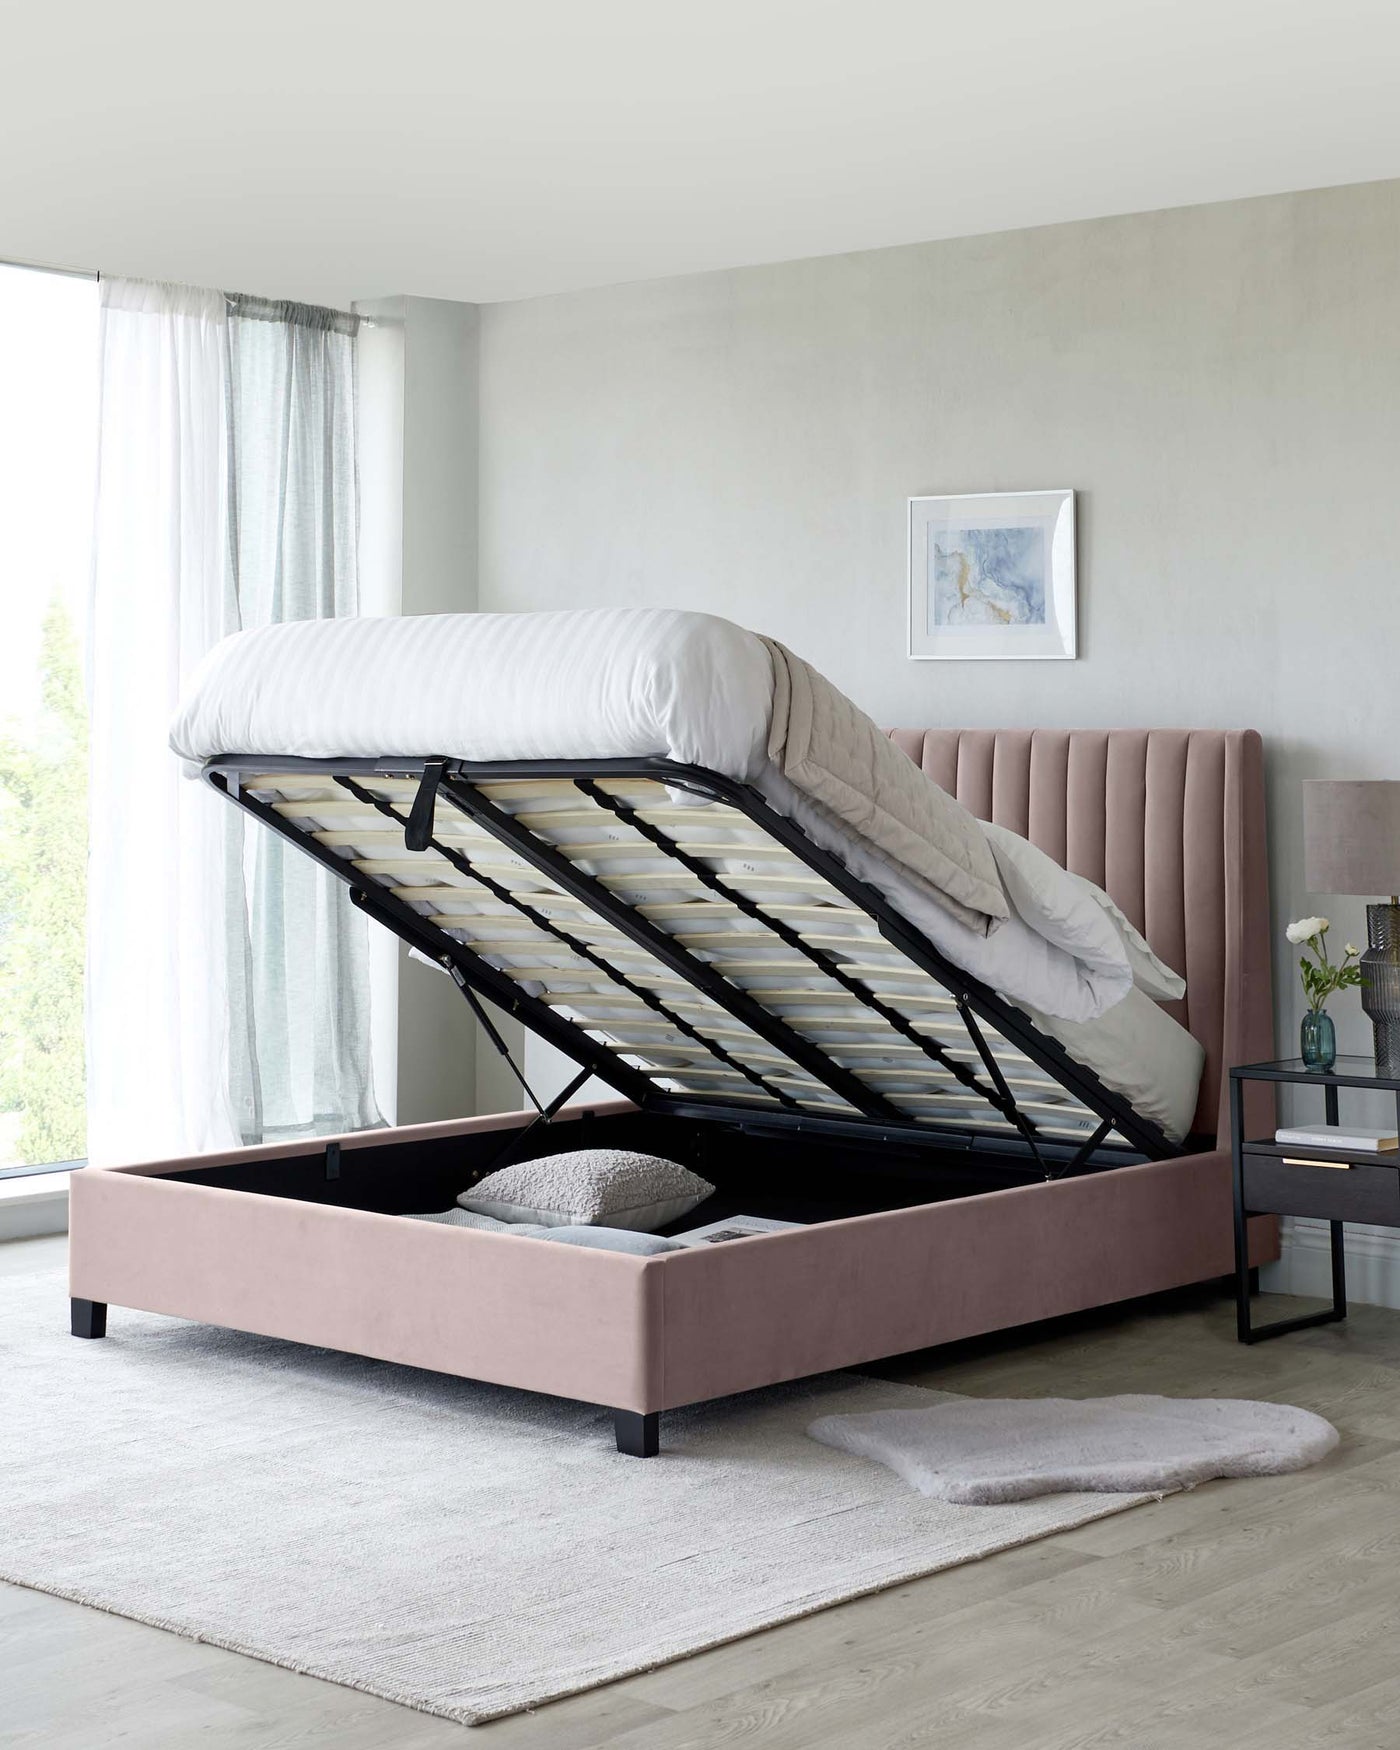 Upholstered storage bed with a raised mattress platform revealing an open storage space beneath, set in a bedroom with a muted colour scheme.